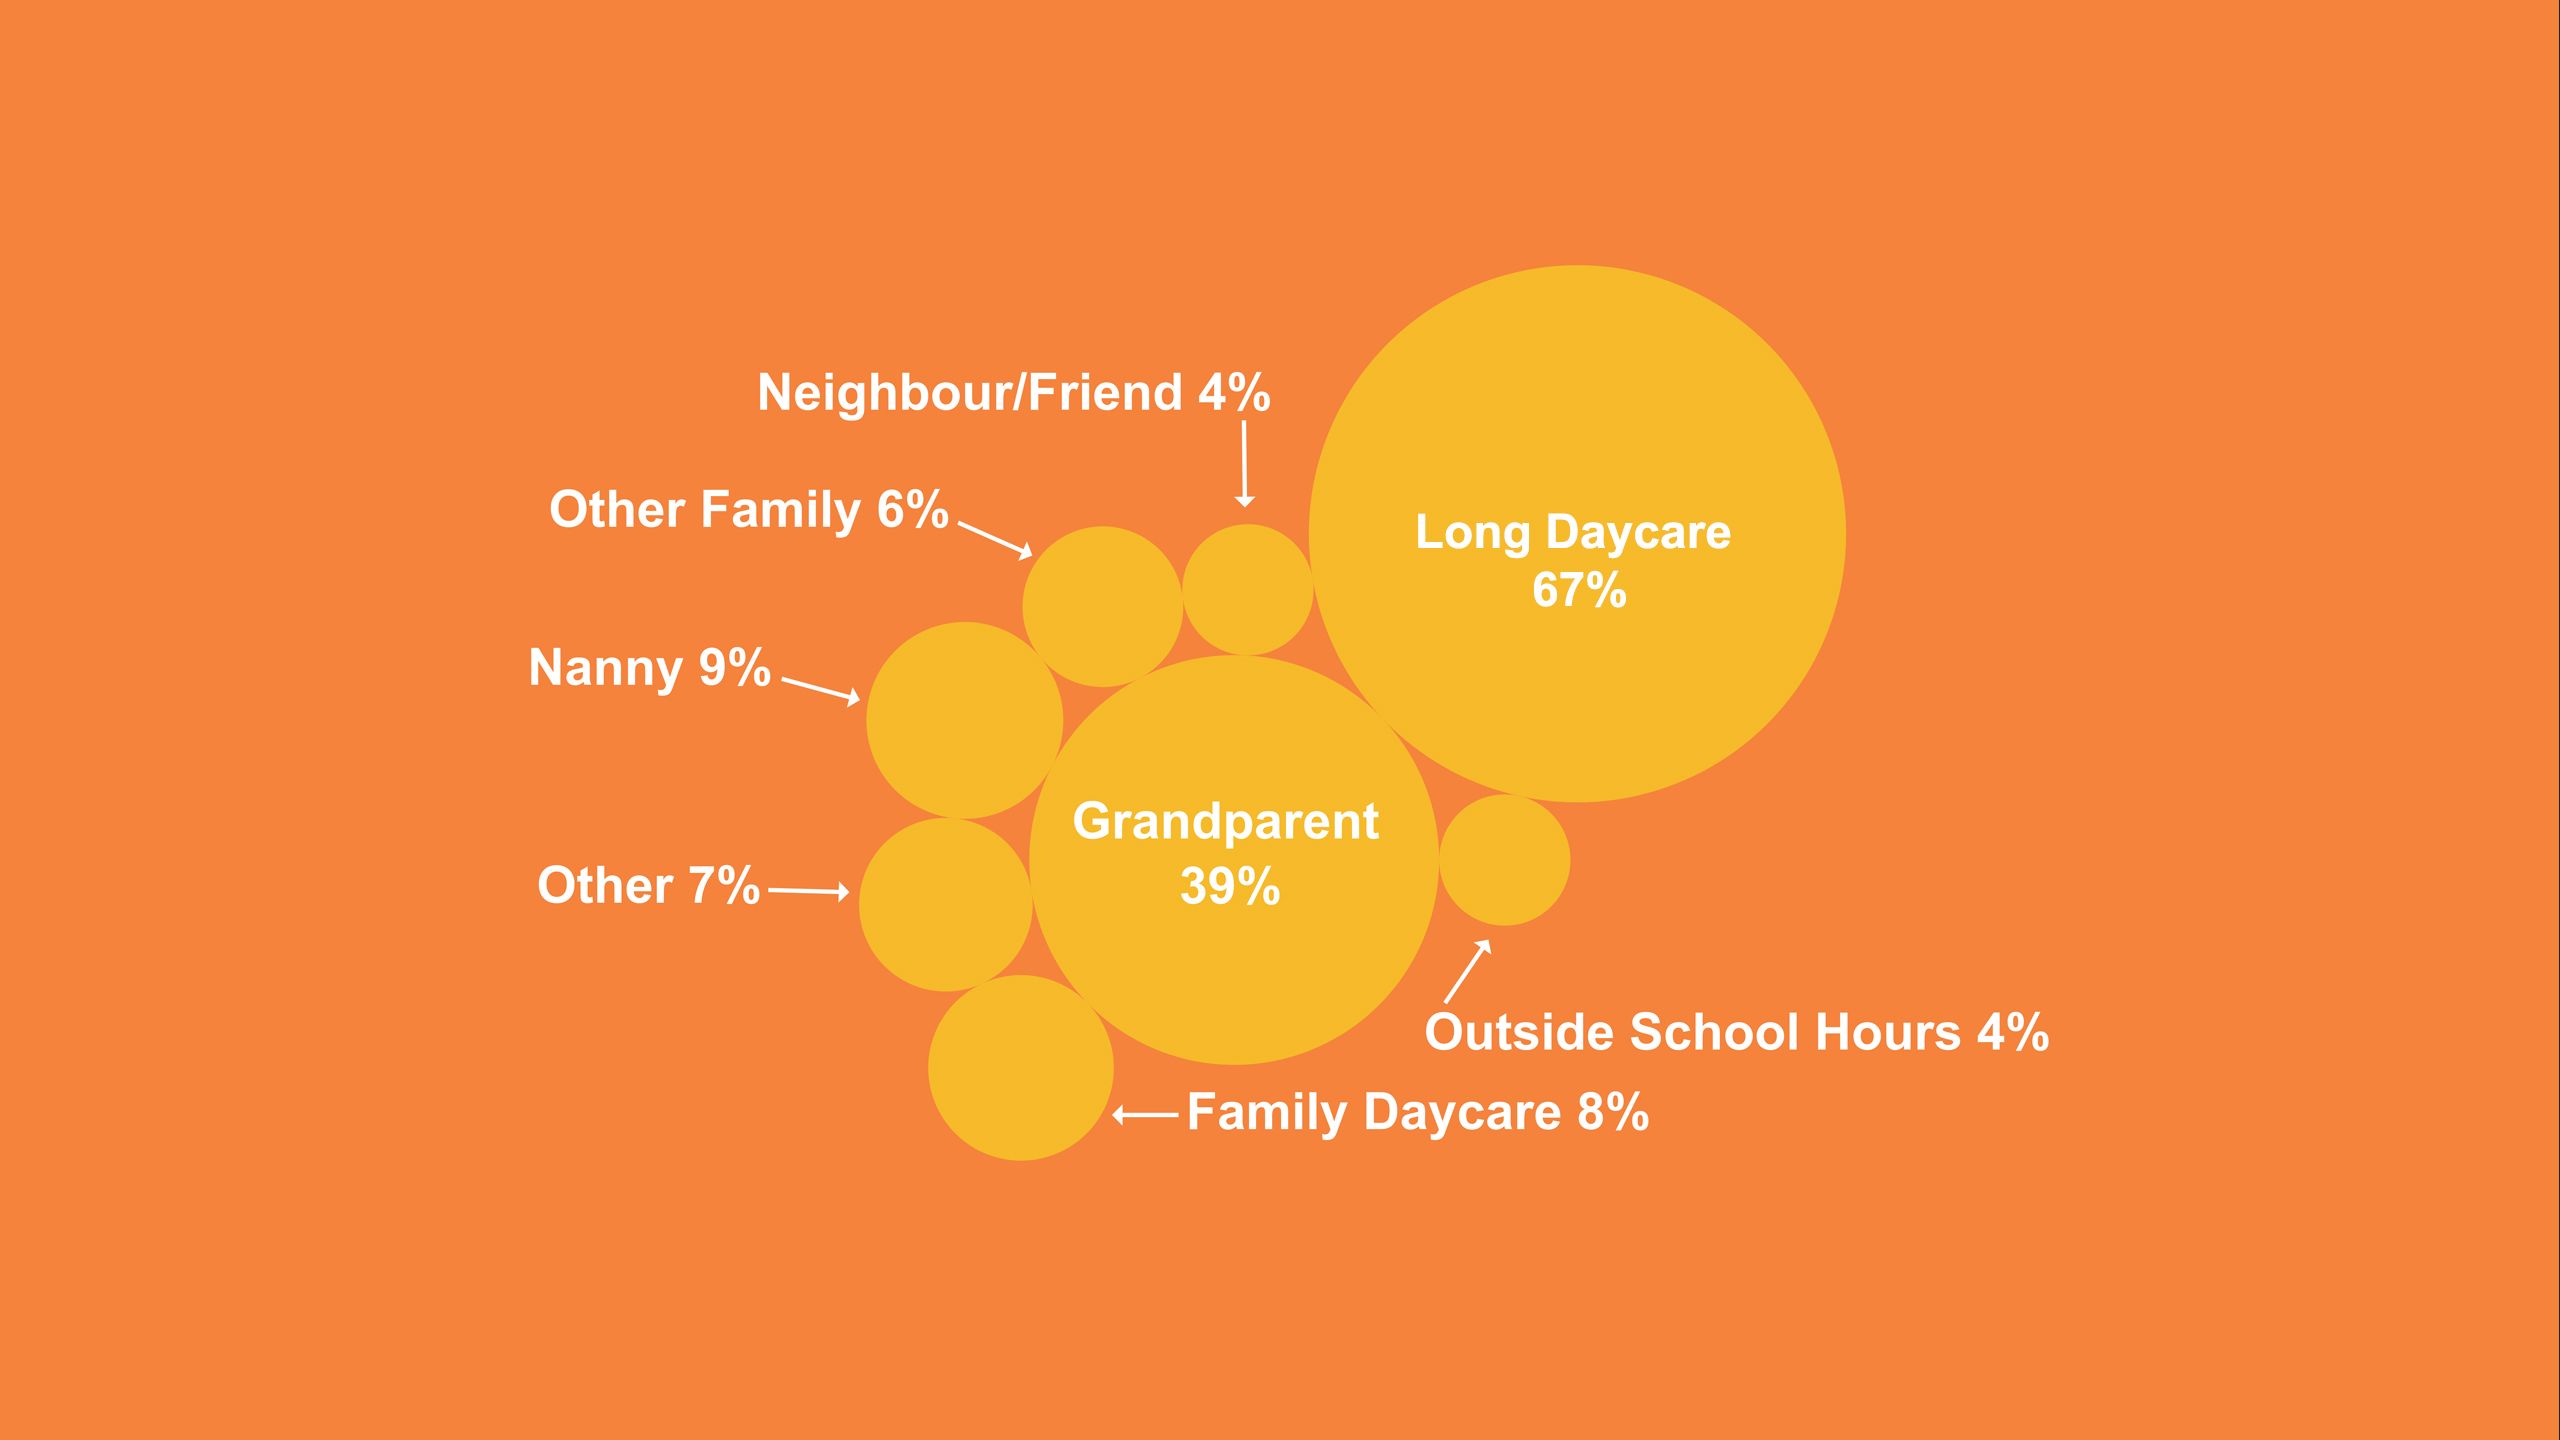 Long day care - 67%, grandparent 39%, nanny 9%, family day care 8%, other 7%, other family 6%, outside school hours 4%, 